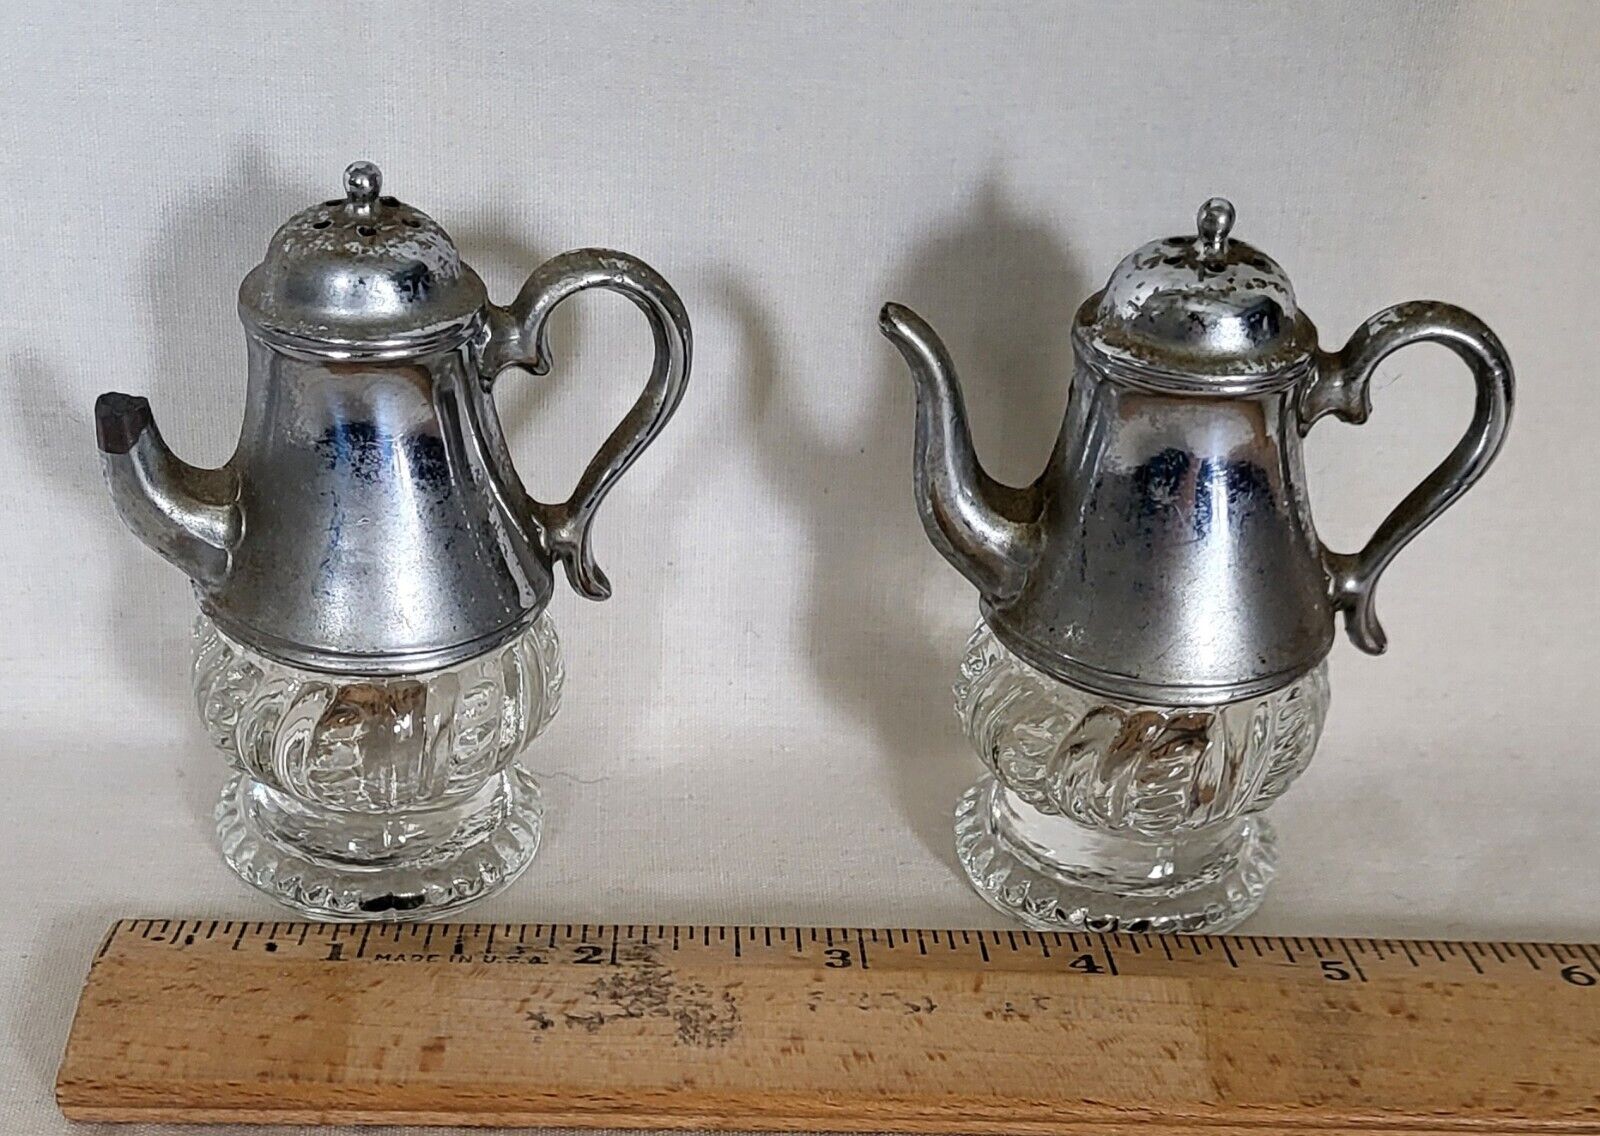 Vintage Heavy Glass and Metal Tea Pot Salt and Pepper Shakers One Broken Spout